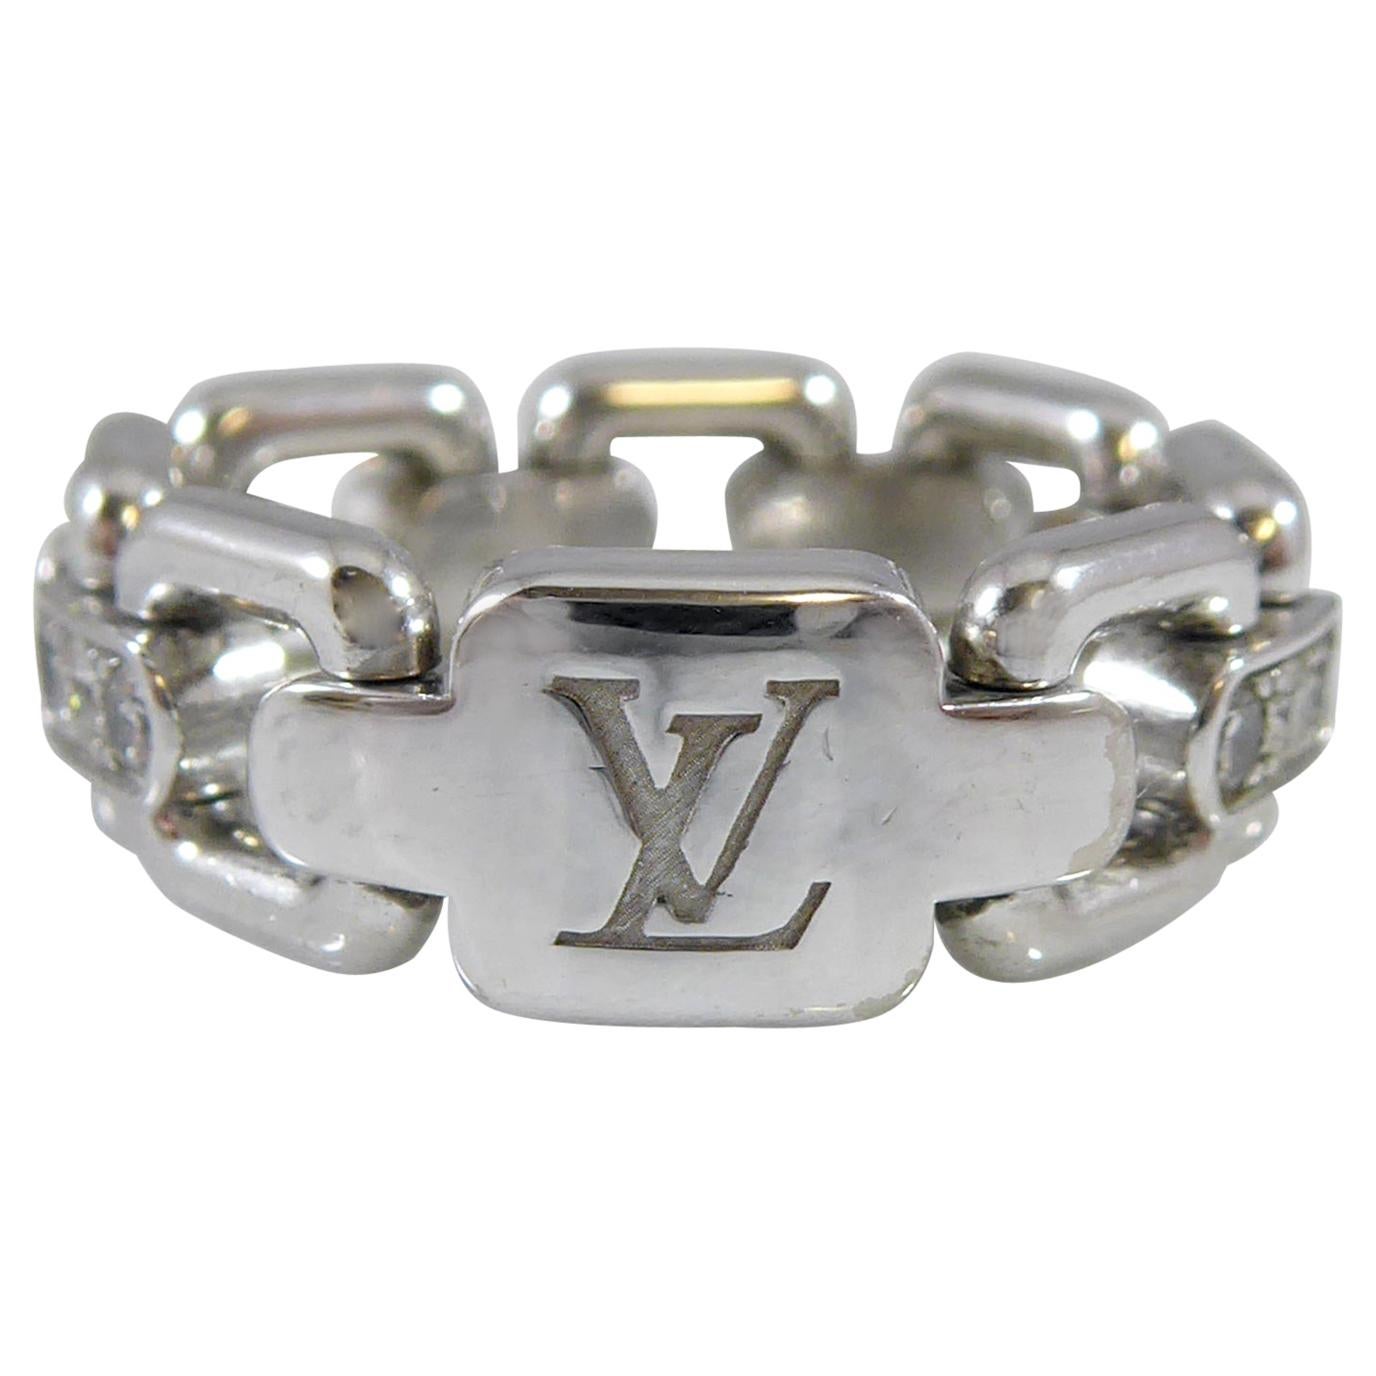 0.39 Carat Louis Vuitton Diamond and White Gold Ring, Flexible Cable Links